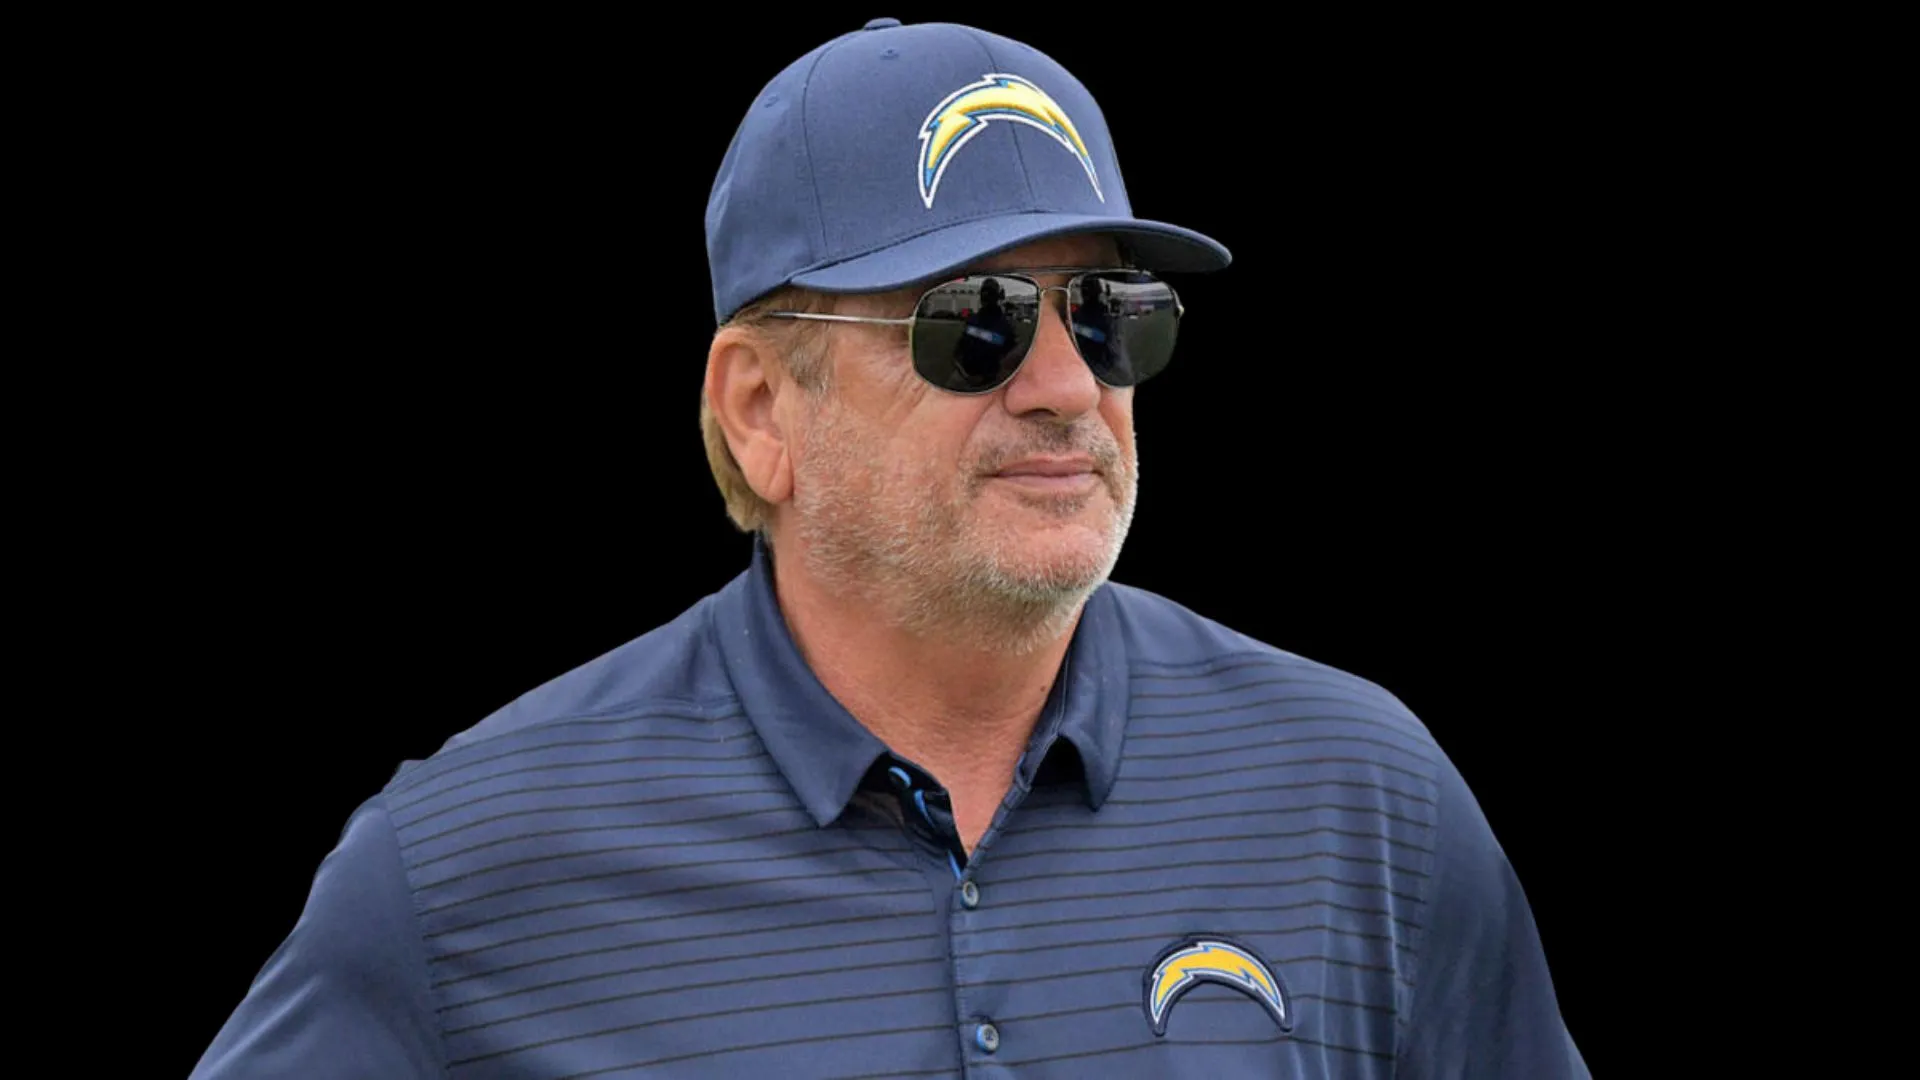 Who is the Owner of LA Chargers?